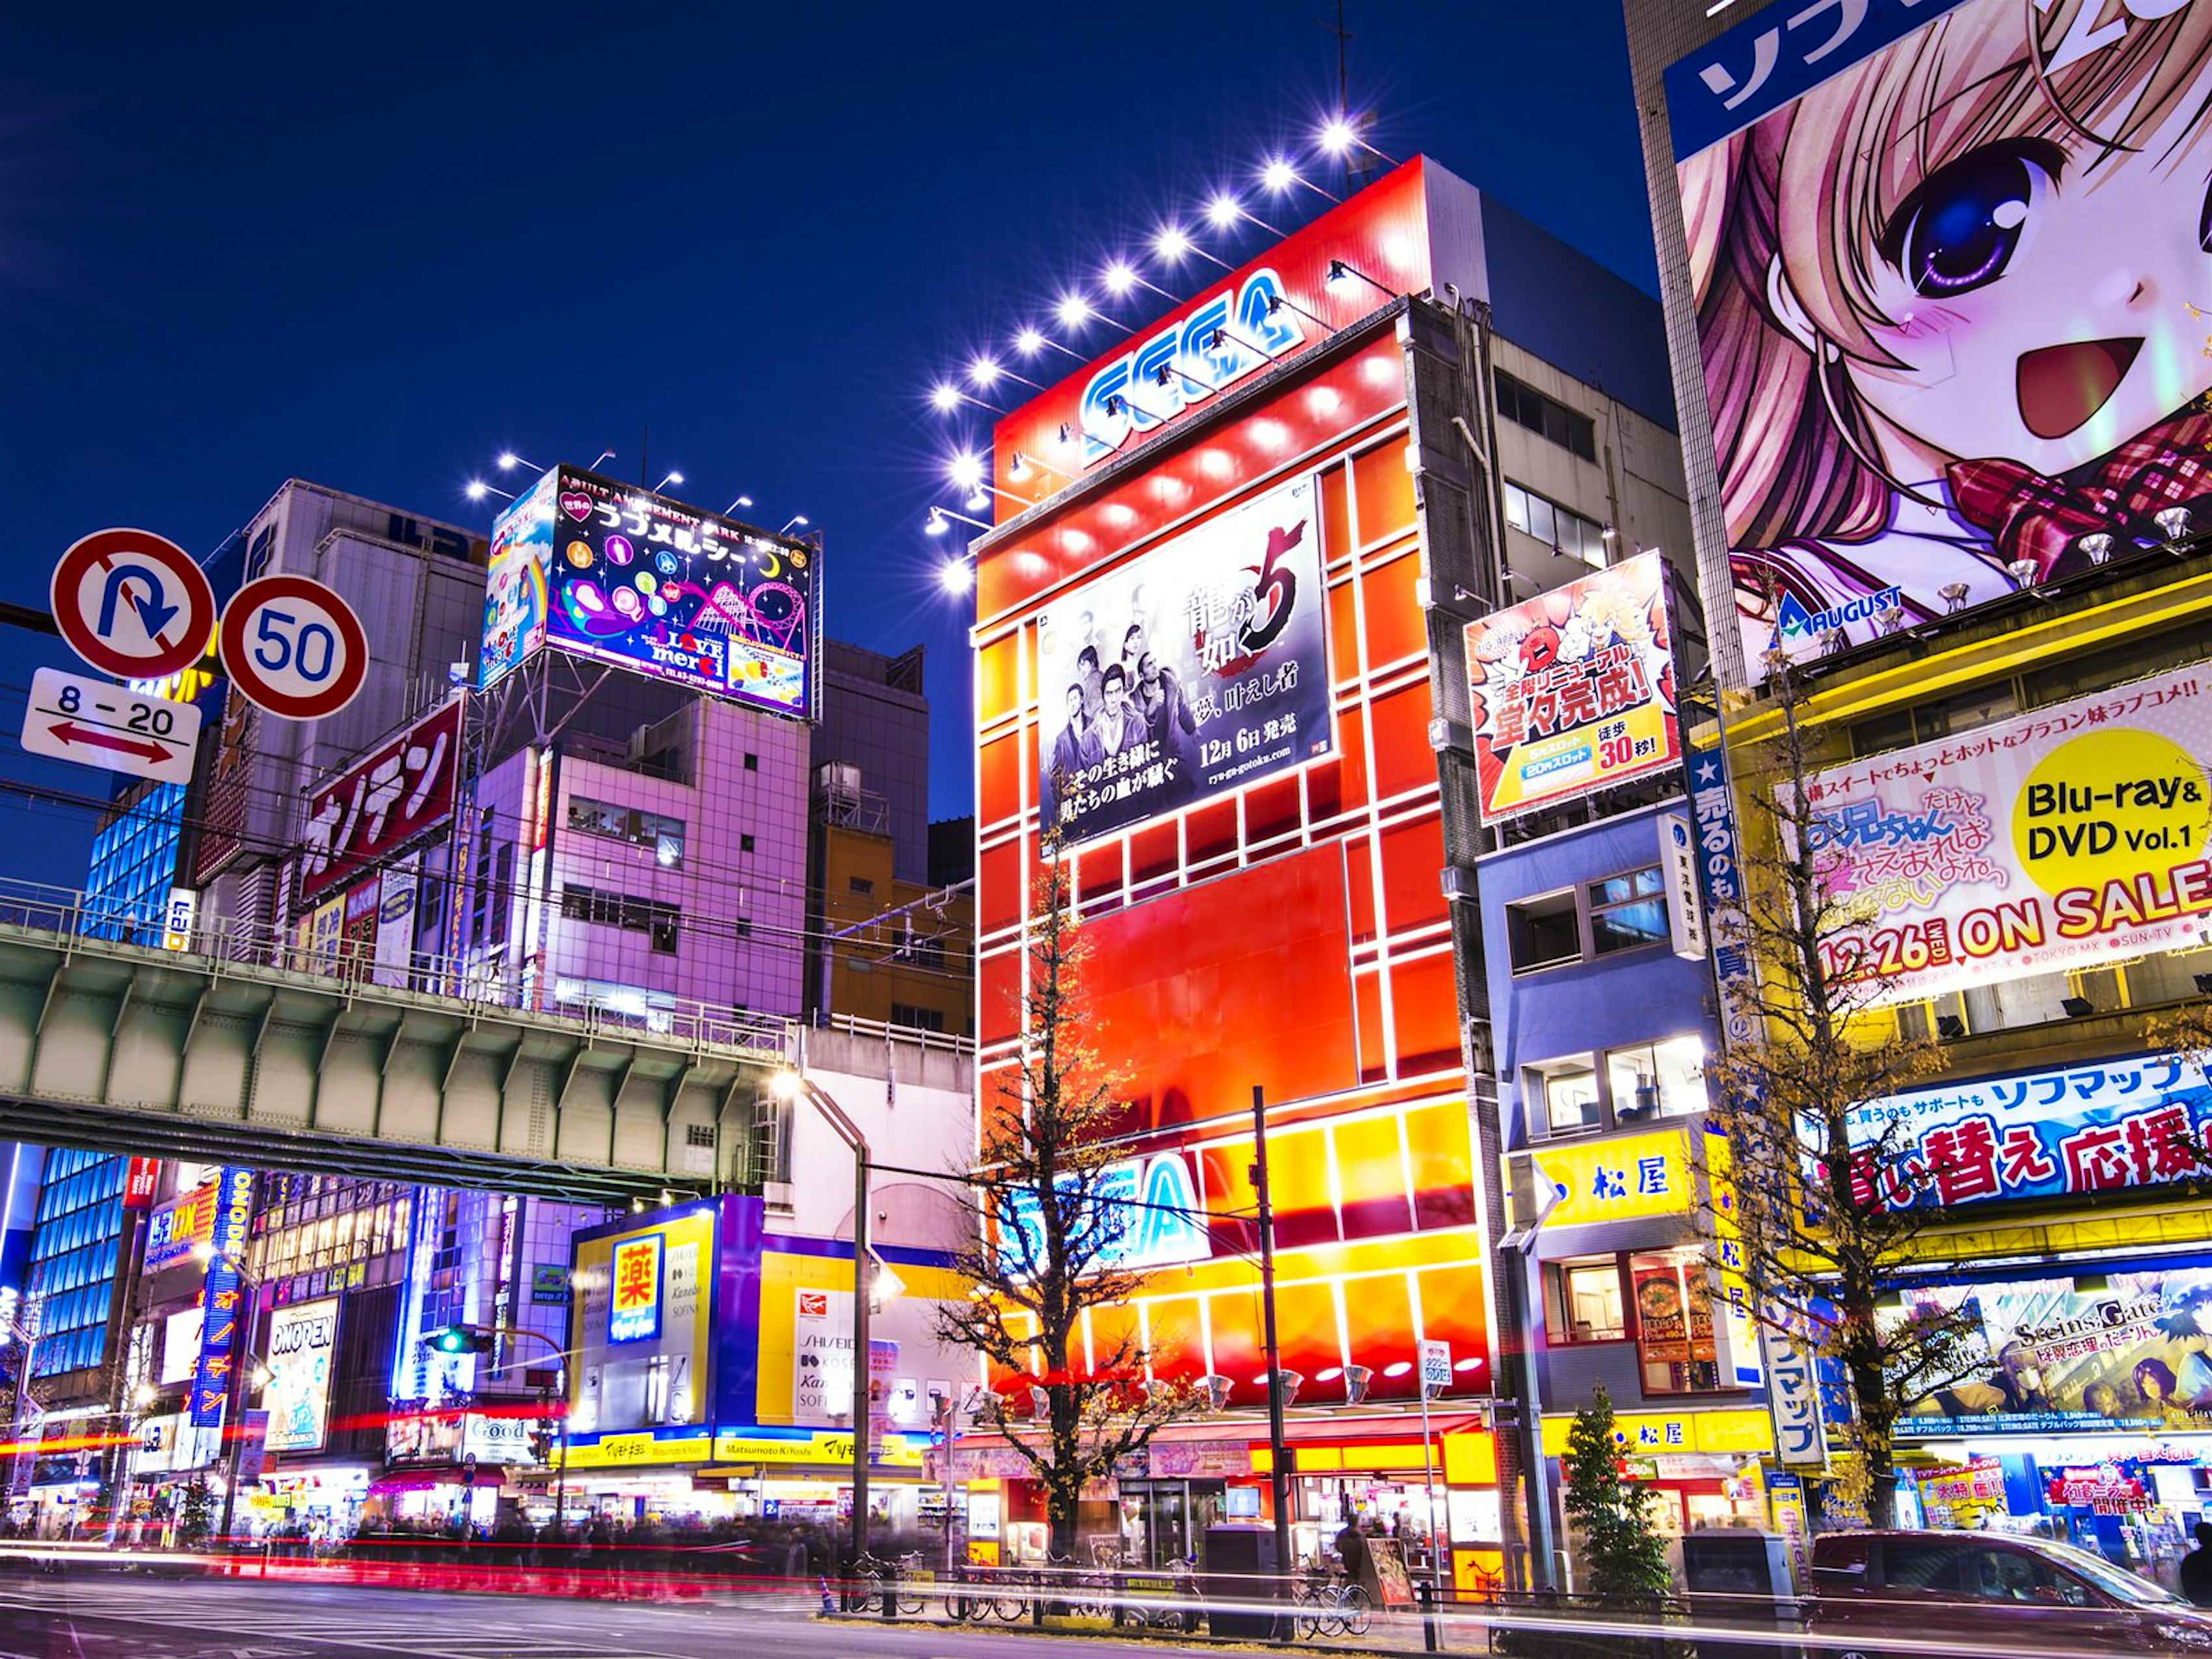 Tokyo S Akihabara District From Electronics To Maid Cafes Lonely Planet